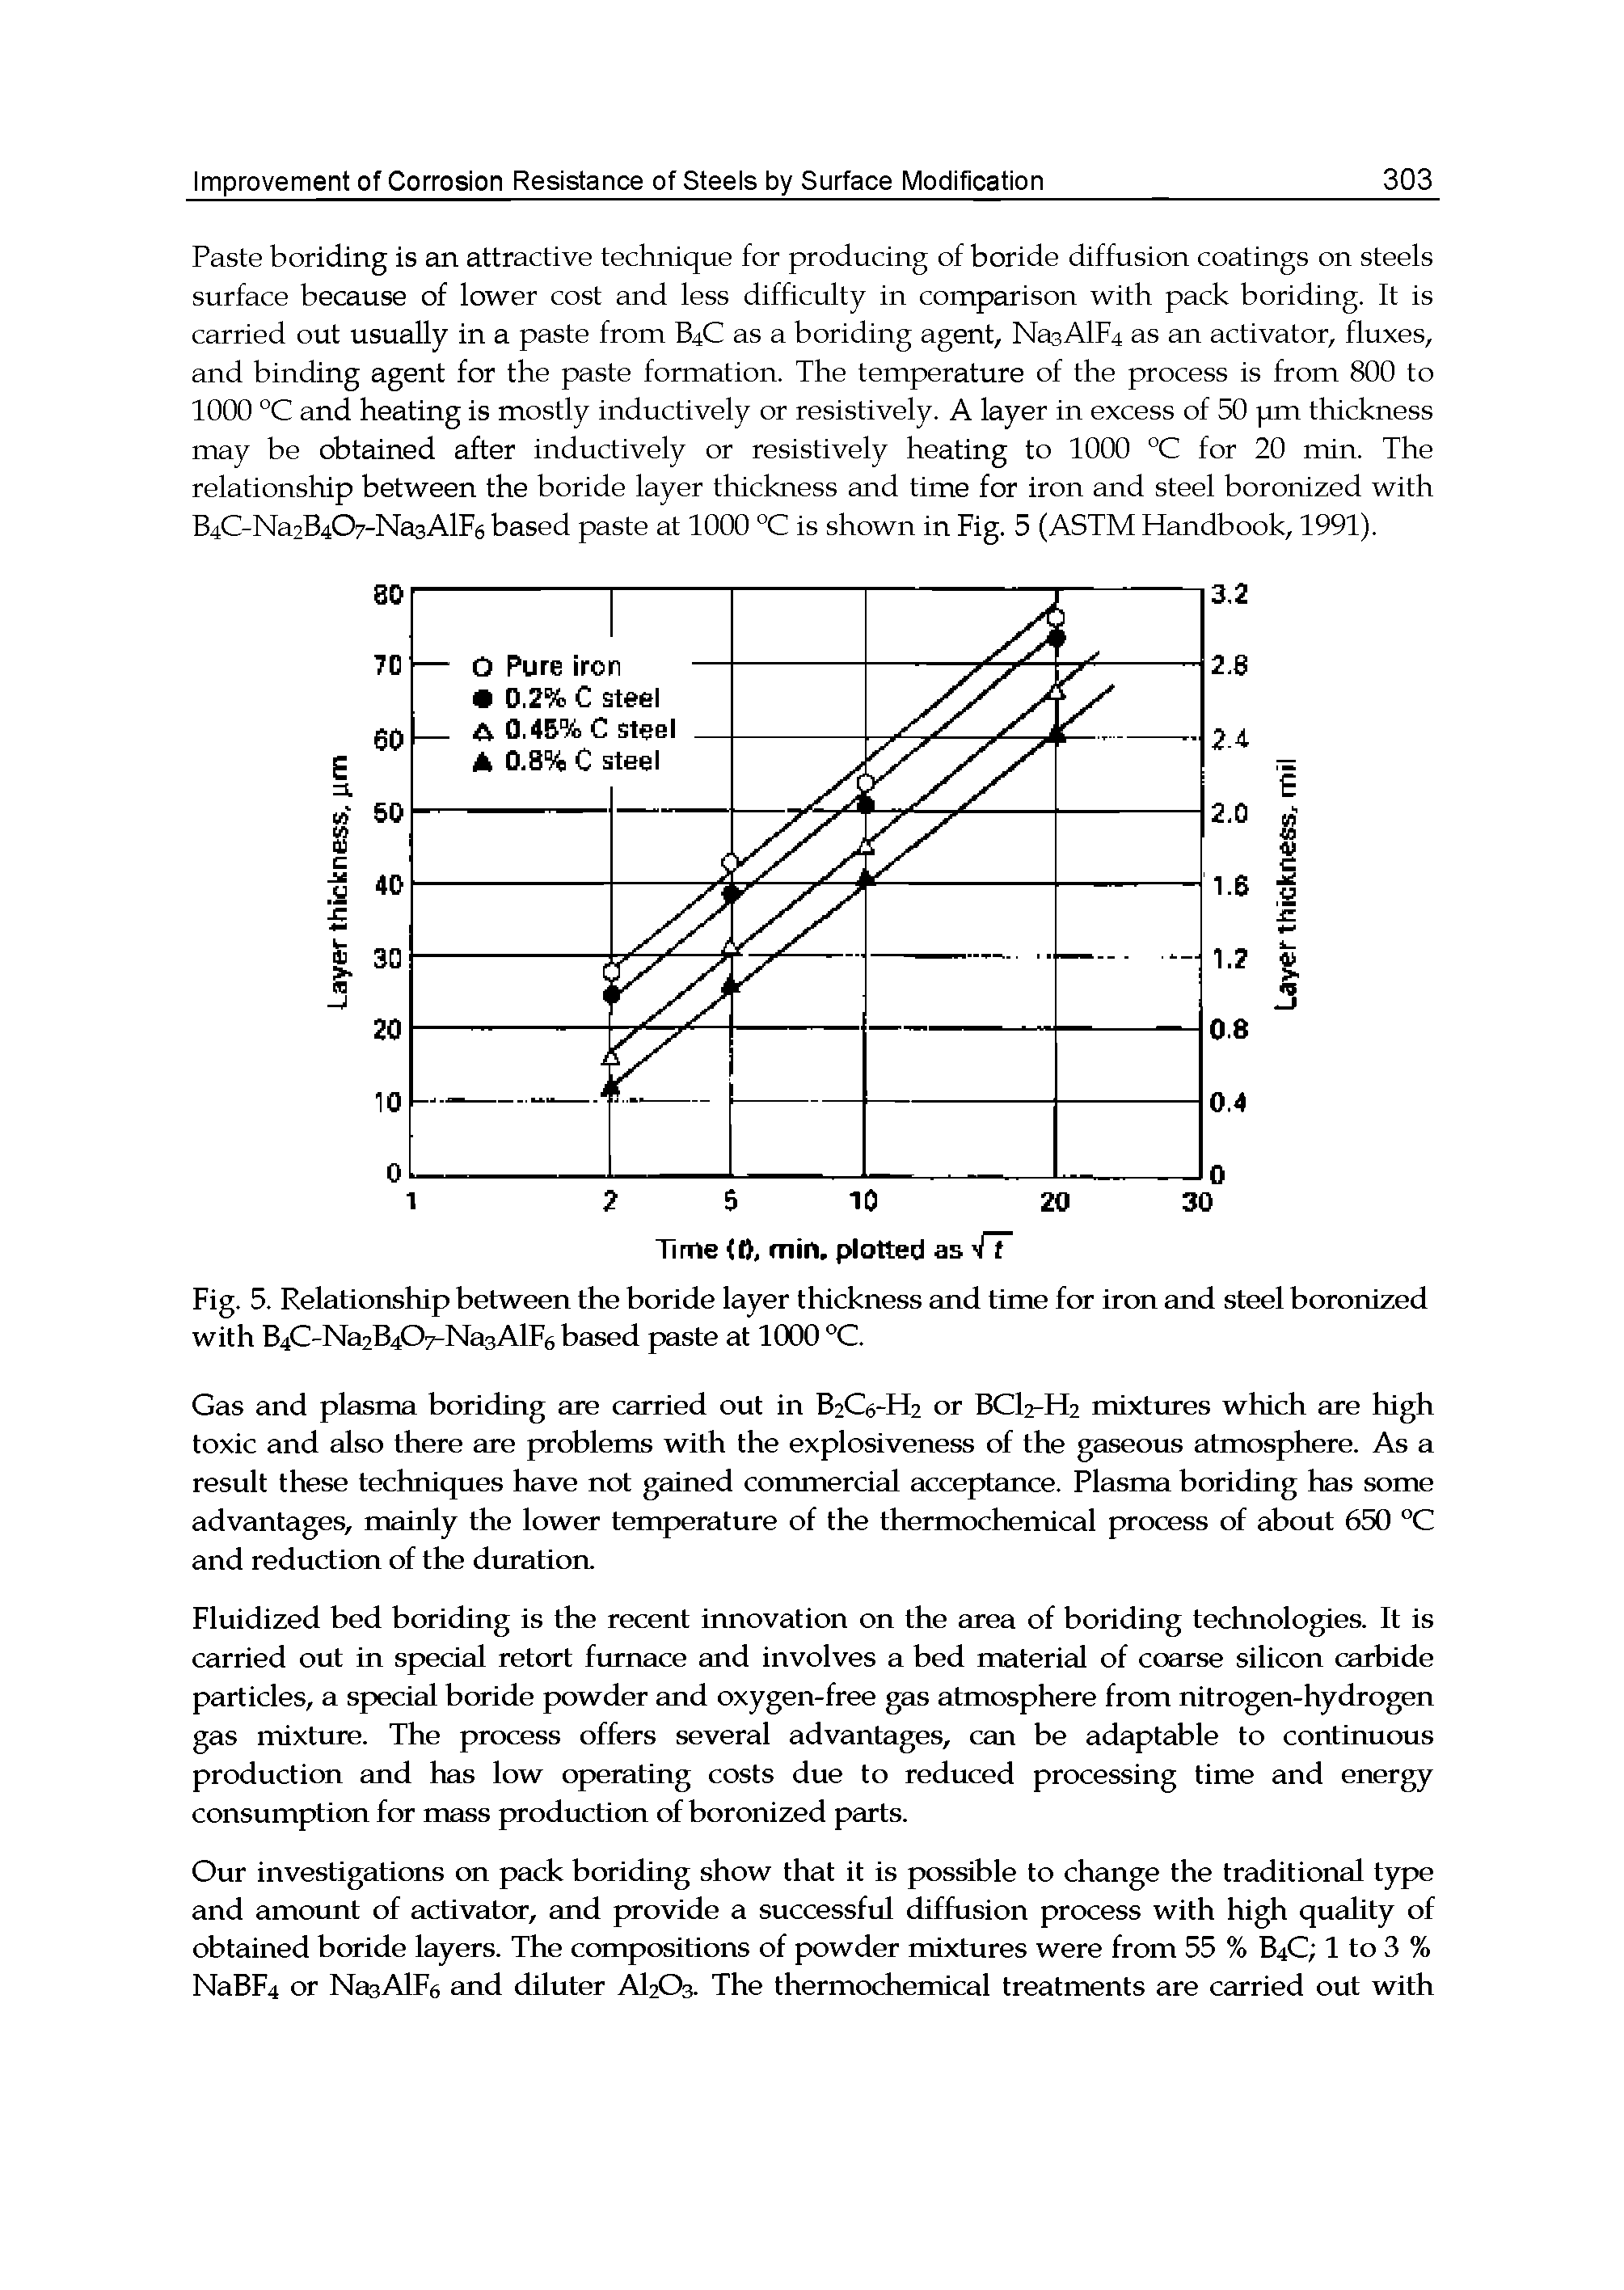 Fig. 5. Relationship between the boride layer thickness and time for iron and steel boronized with B4C-Na2B4CVNa3AlF6 based paste at 1000 °C.